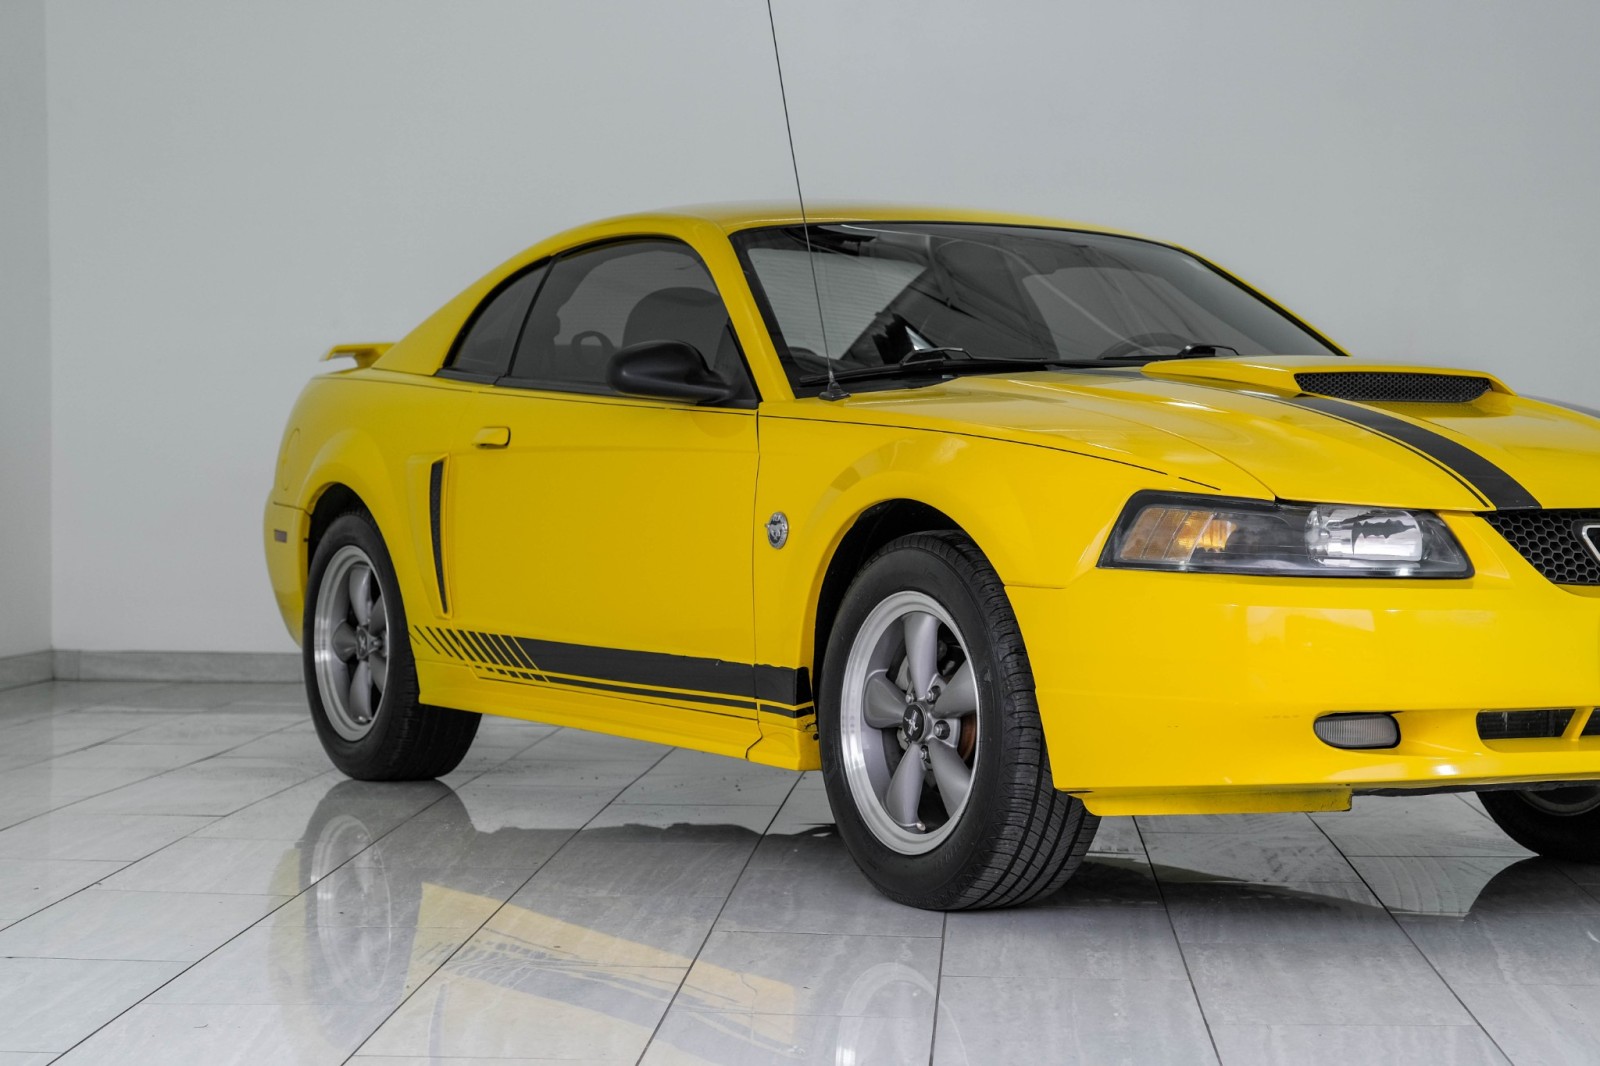 2004 Ford Mustang GT DELUXE LEATHER SEATS MACH AUDIO SYSTEM CRUISE C 5